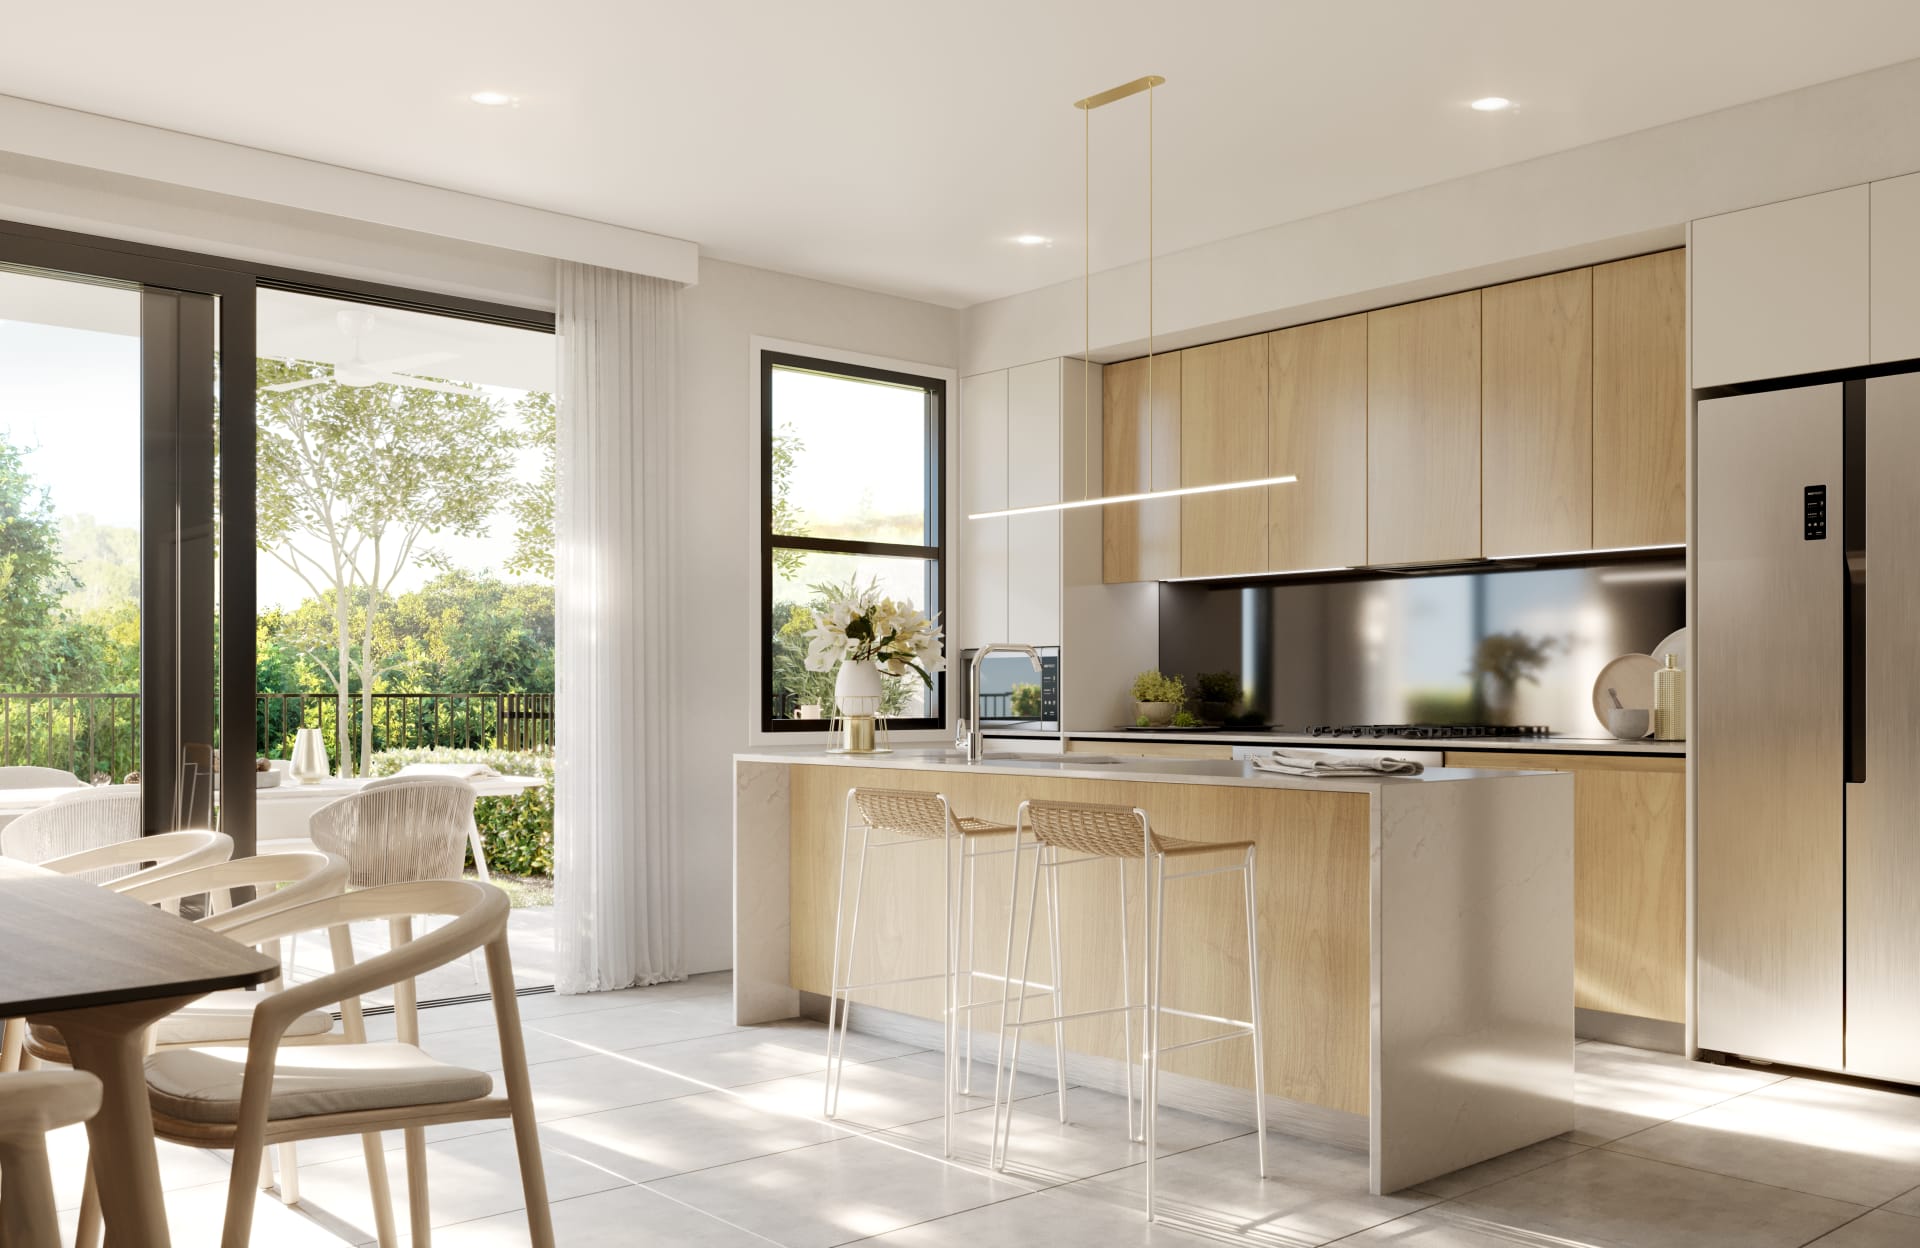 Final townhomes released in Helensvale's Serenity Reserve